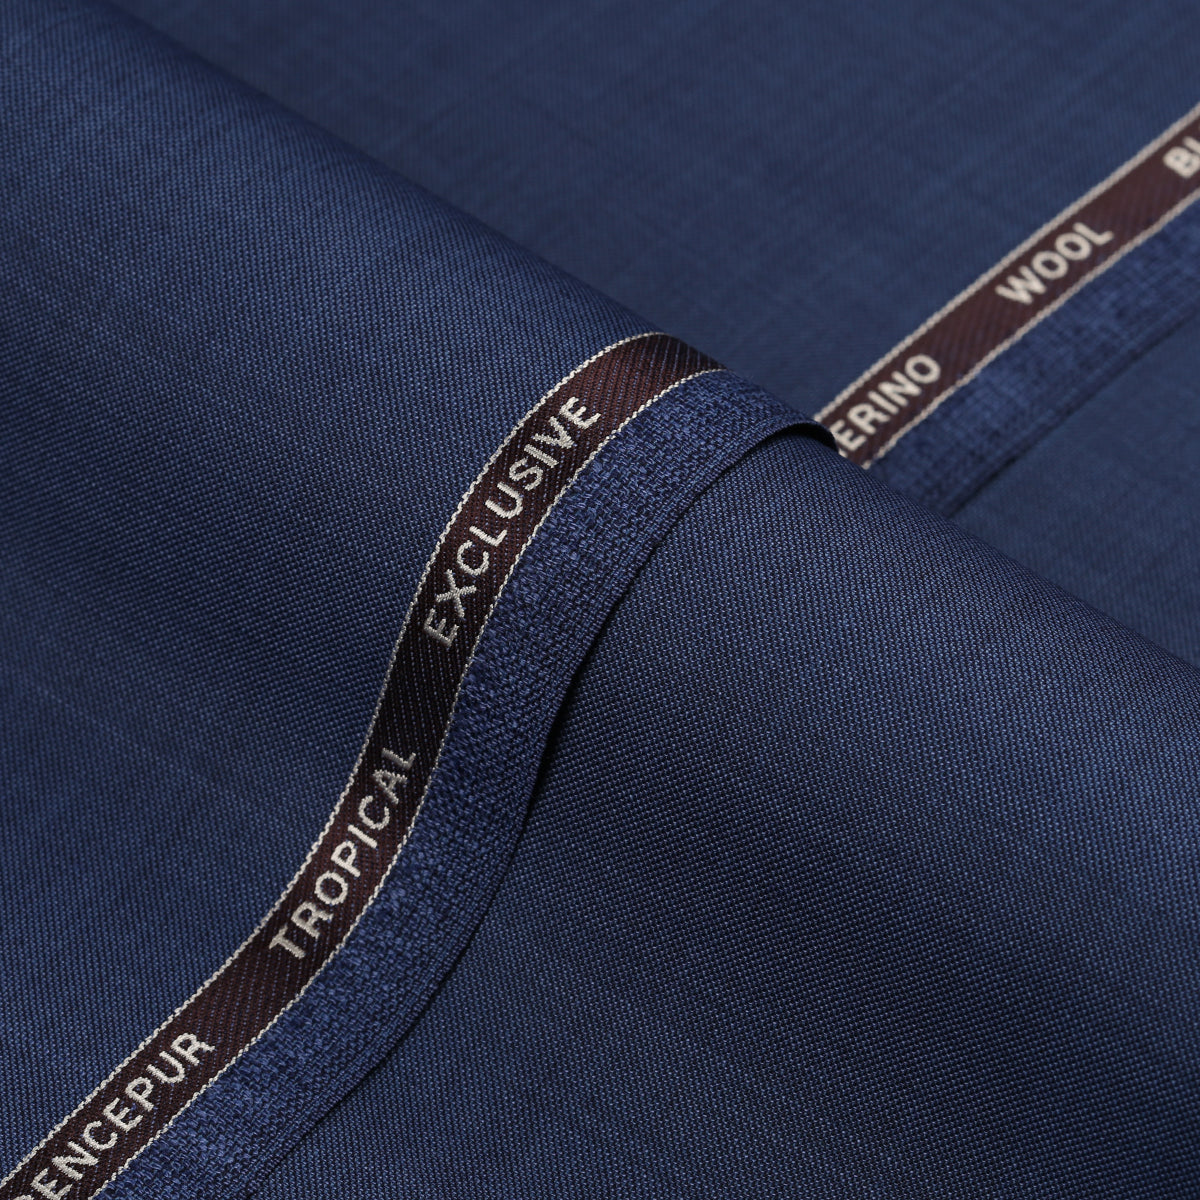 Textured Twill-Yale Blue, Wool Blend, Tropical Exclusive Suiting Fabric